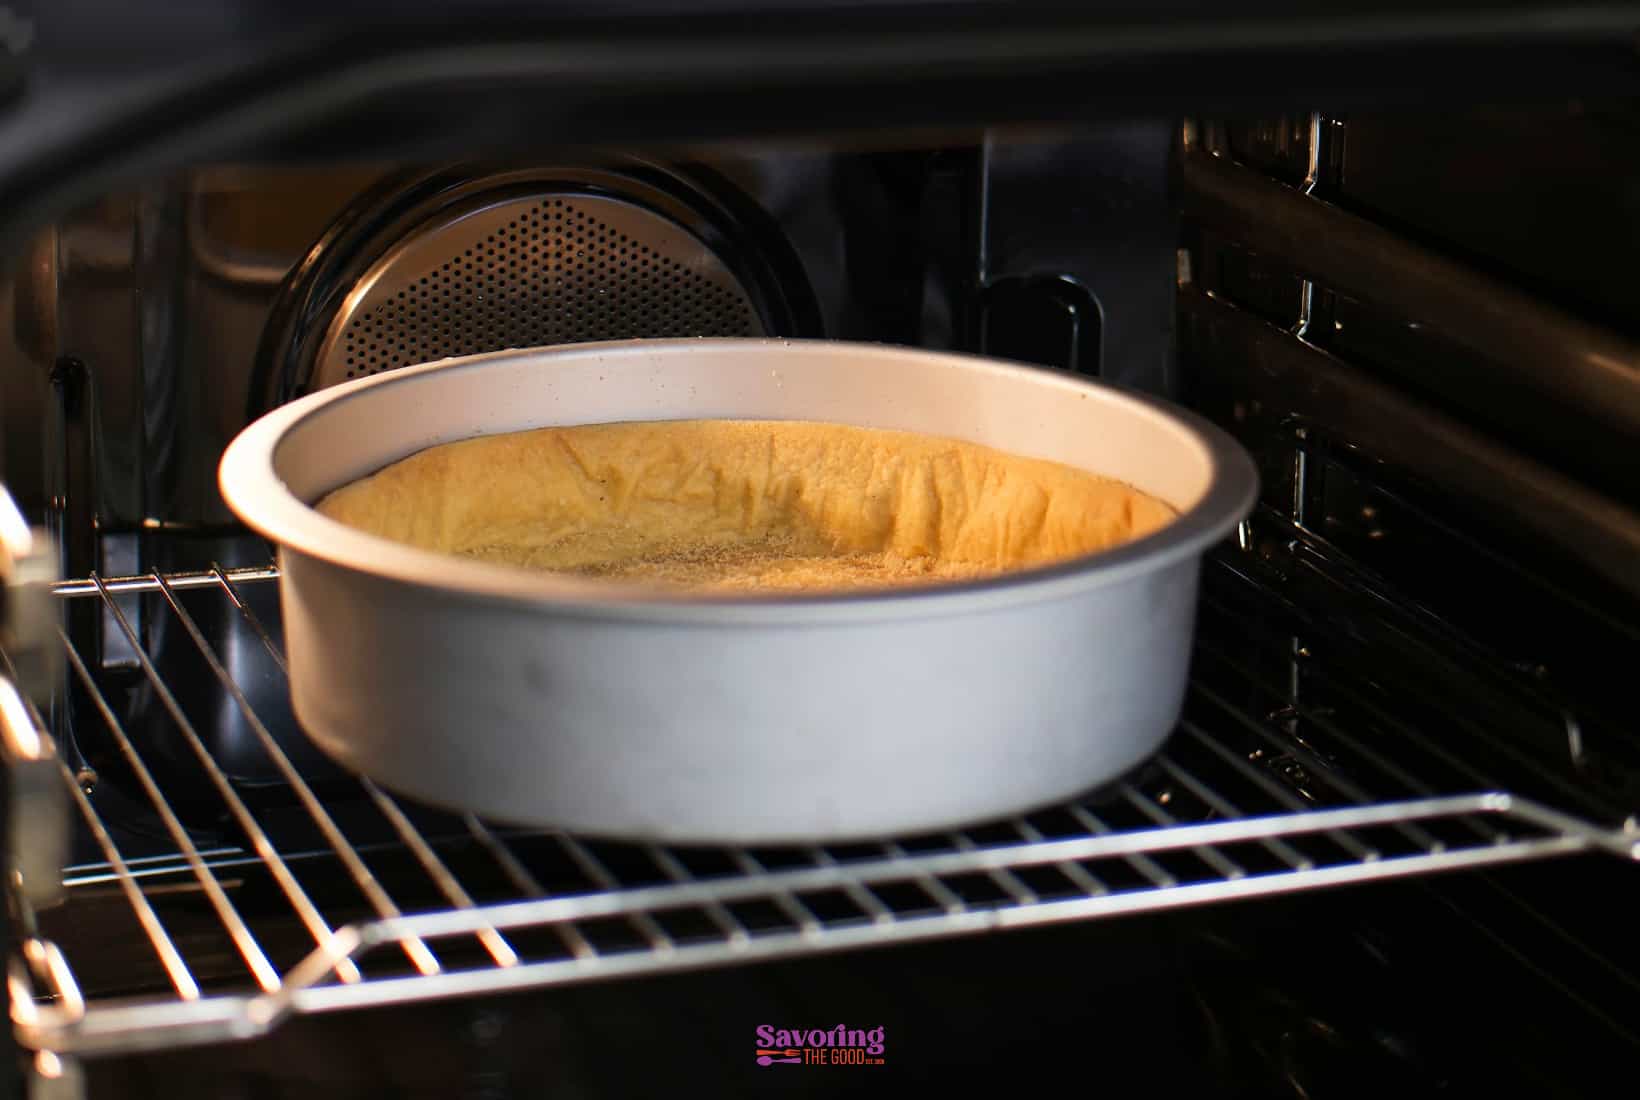 a sunken yellow cake in a pan in an oven.